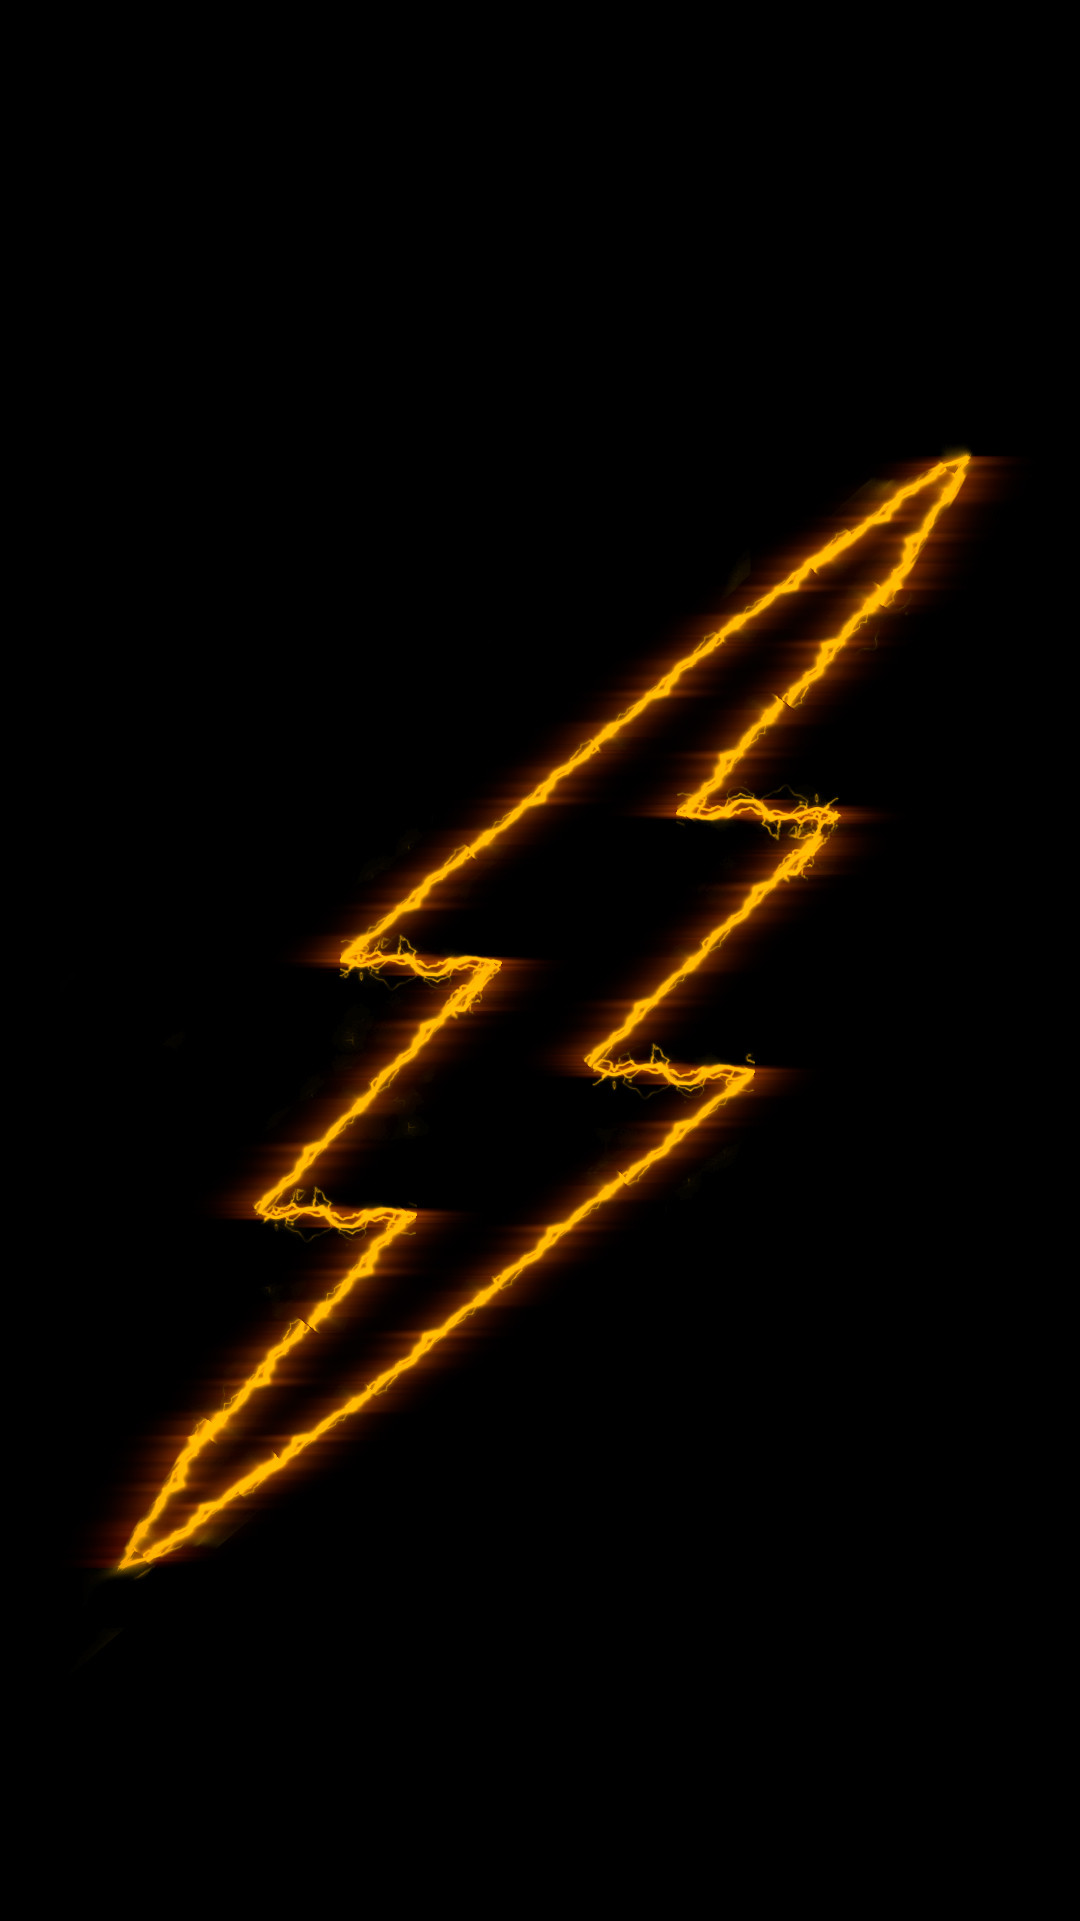 The Flash Logo Wallpaper Free Custom Made iPhone 6 / 6S wallpaper. Use for FREE